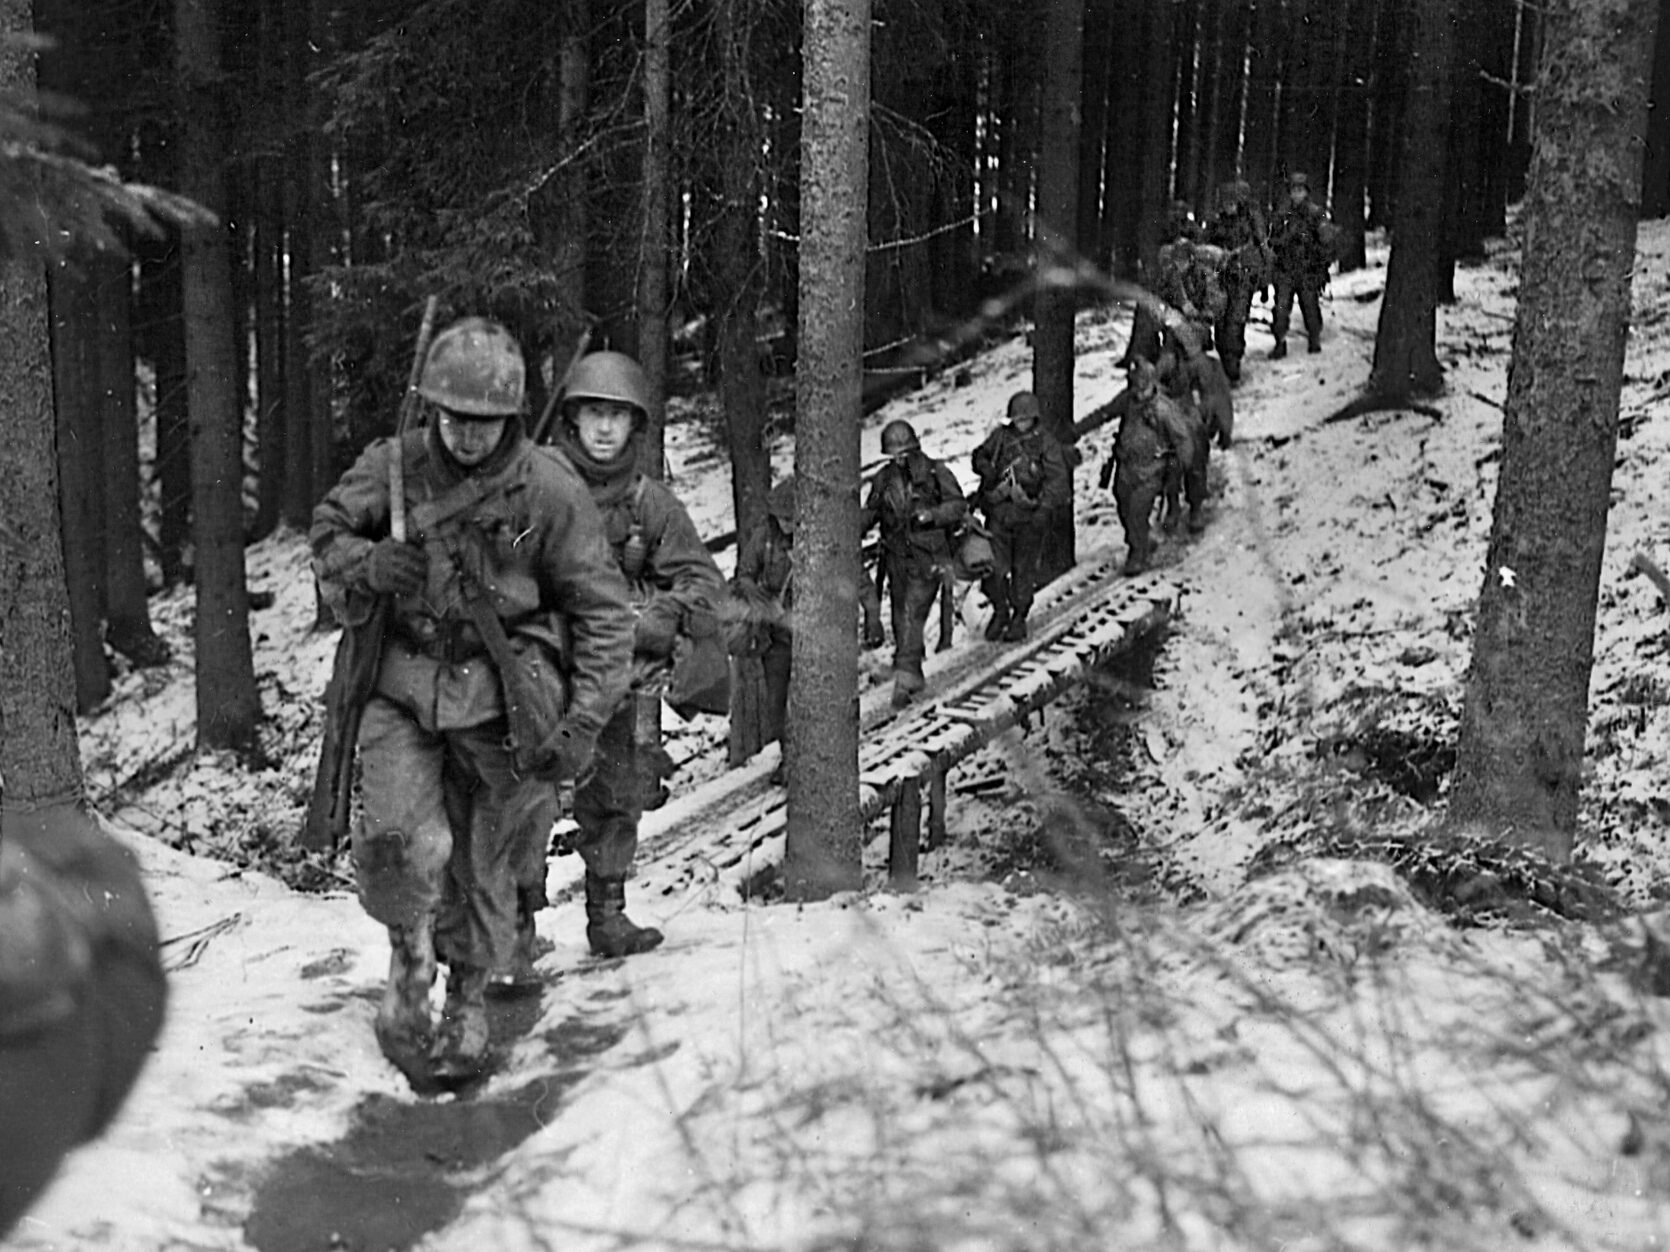 The 106th Infantry Division was totally new to combat and stood no chance against the overwhelming number of Germans. Here, a unit from the 106th patrols near St. Vith, Belgium, December 1944.